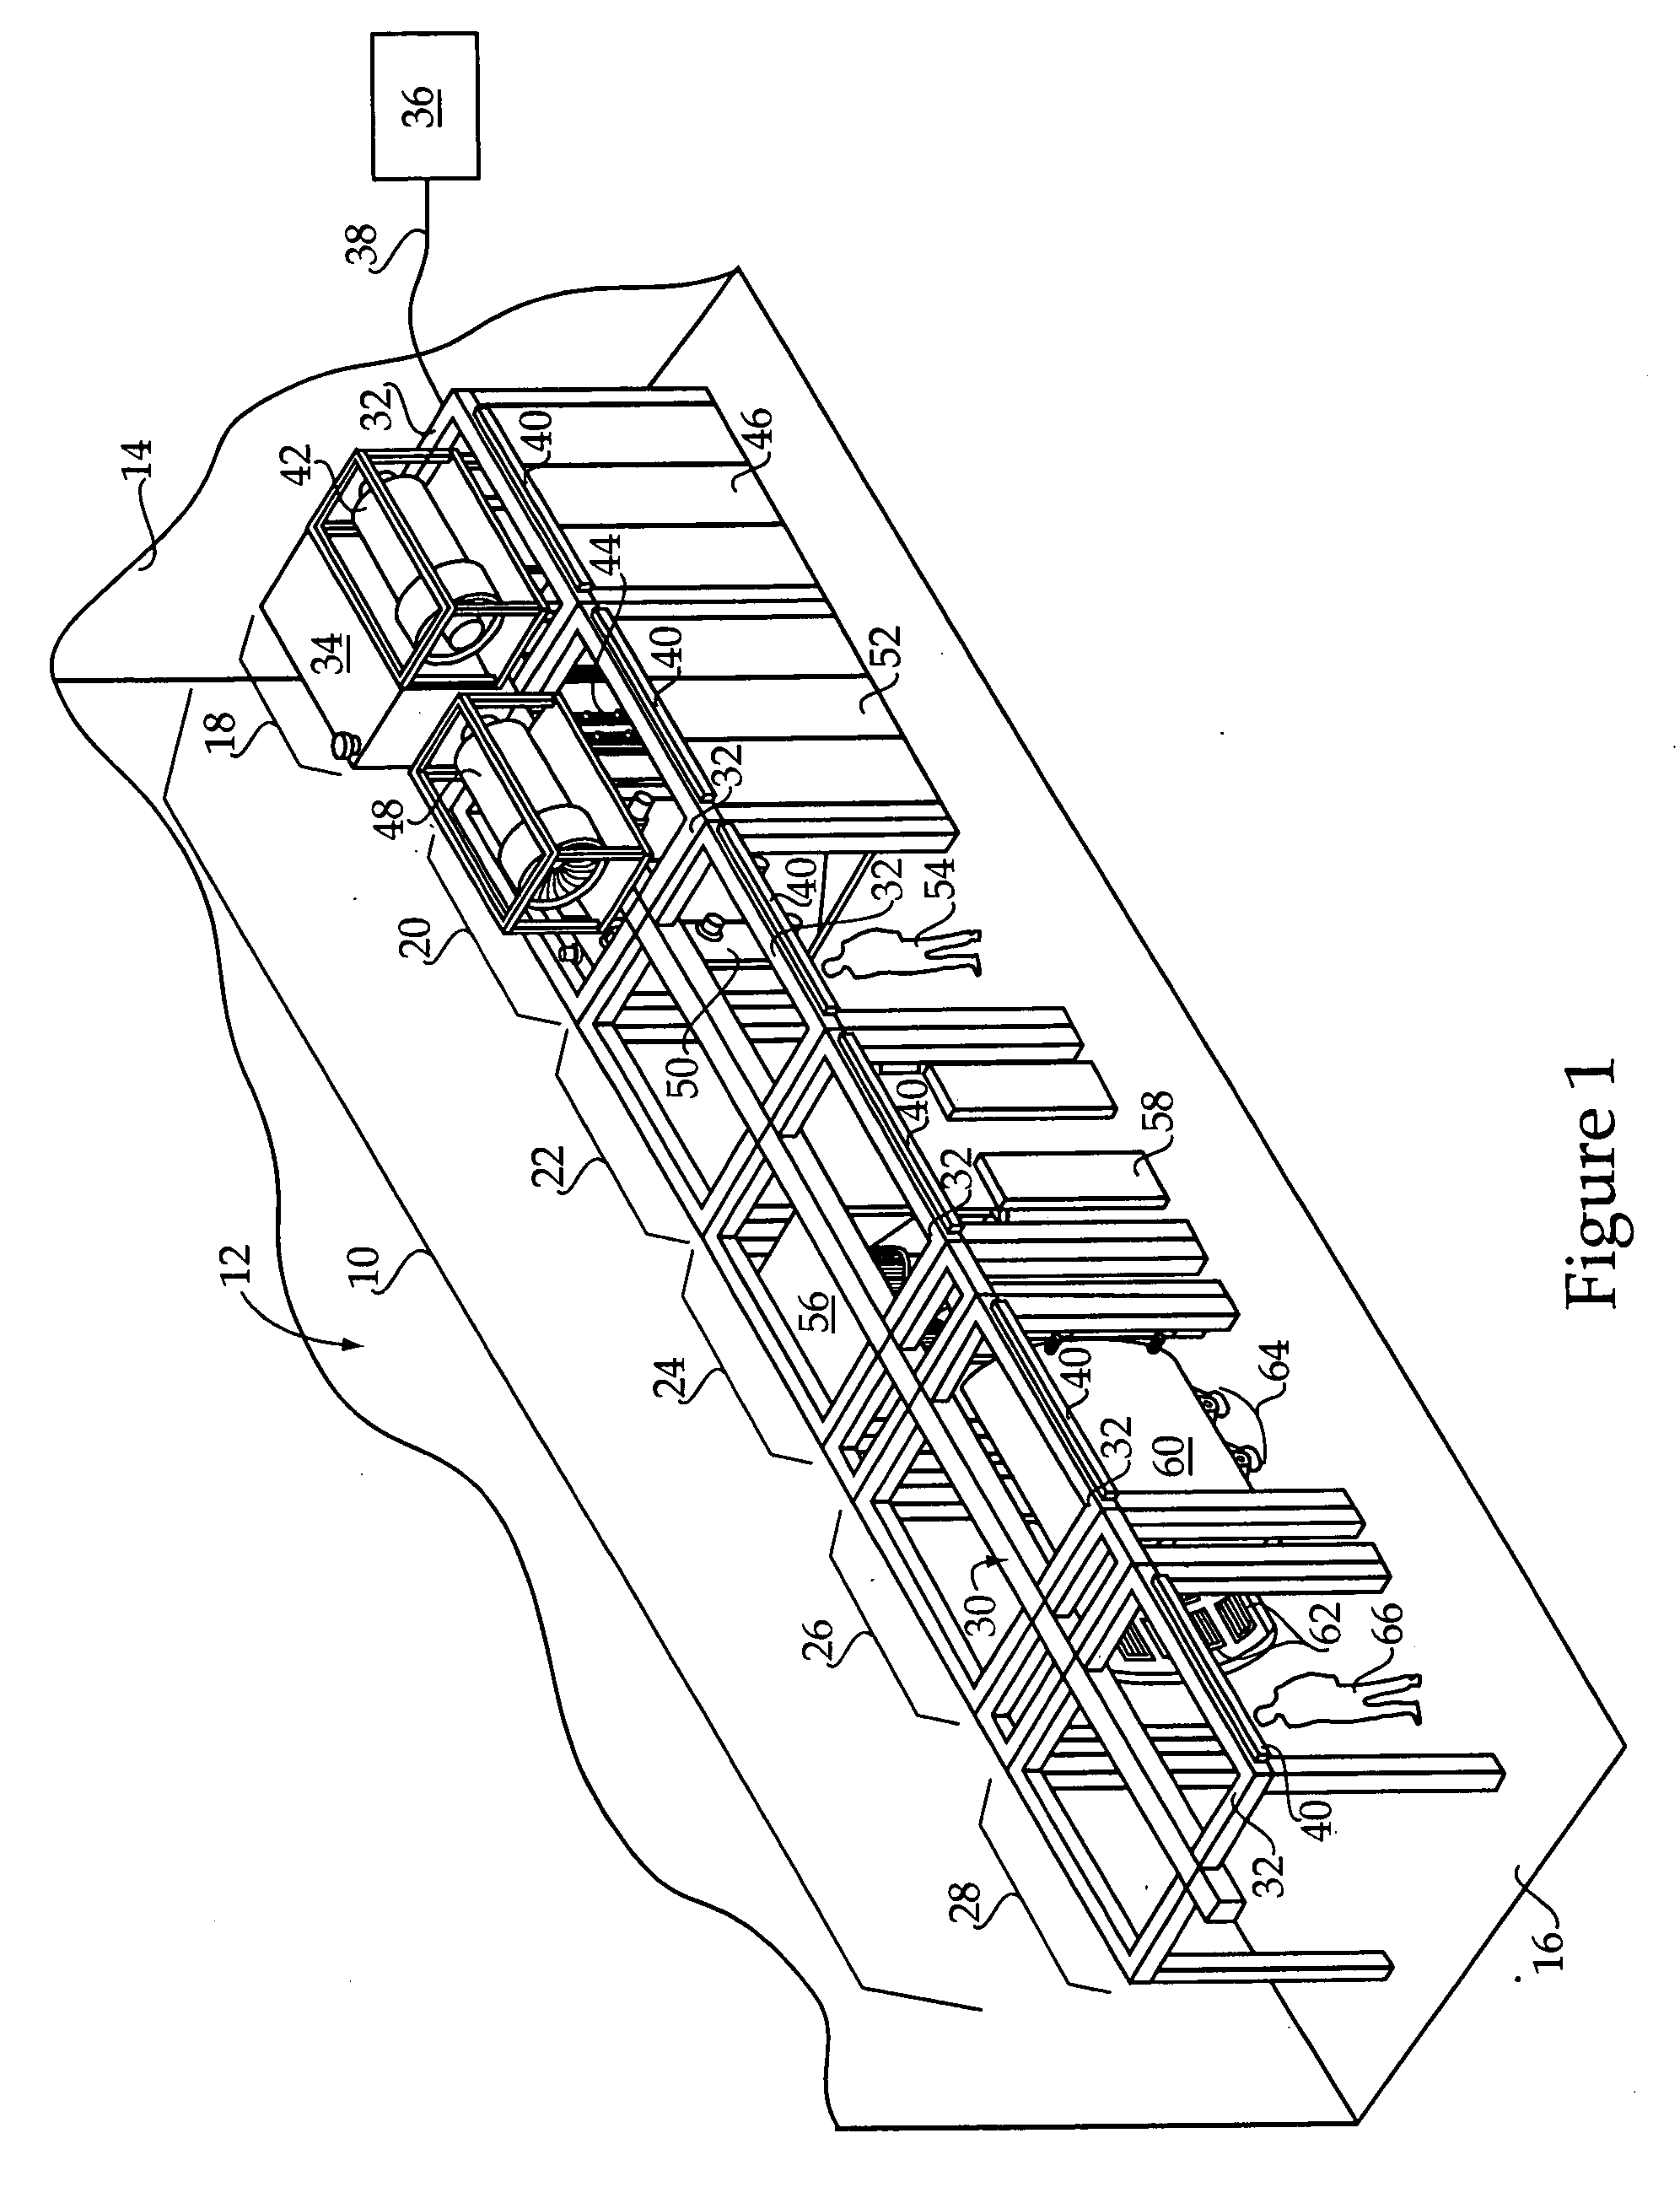 Friction drive material handling system including composite beam and method of operating same